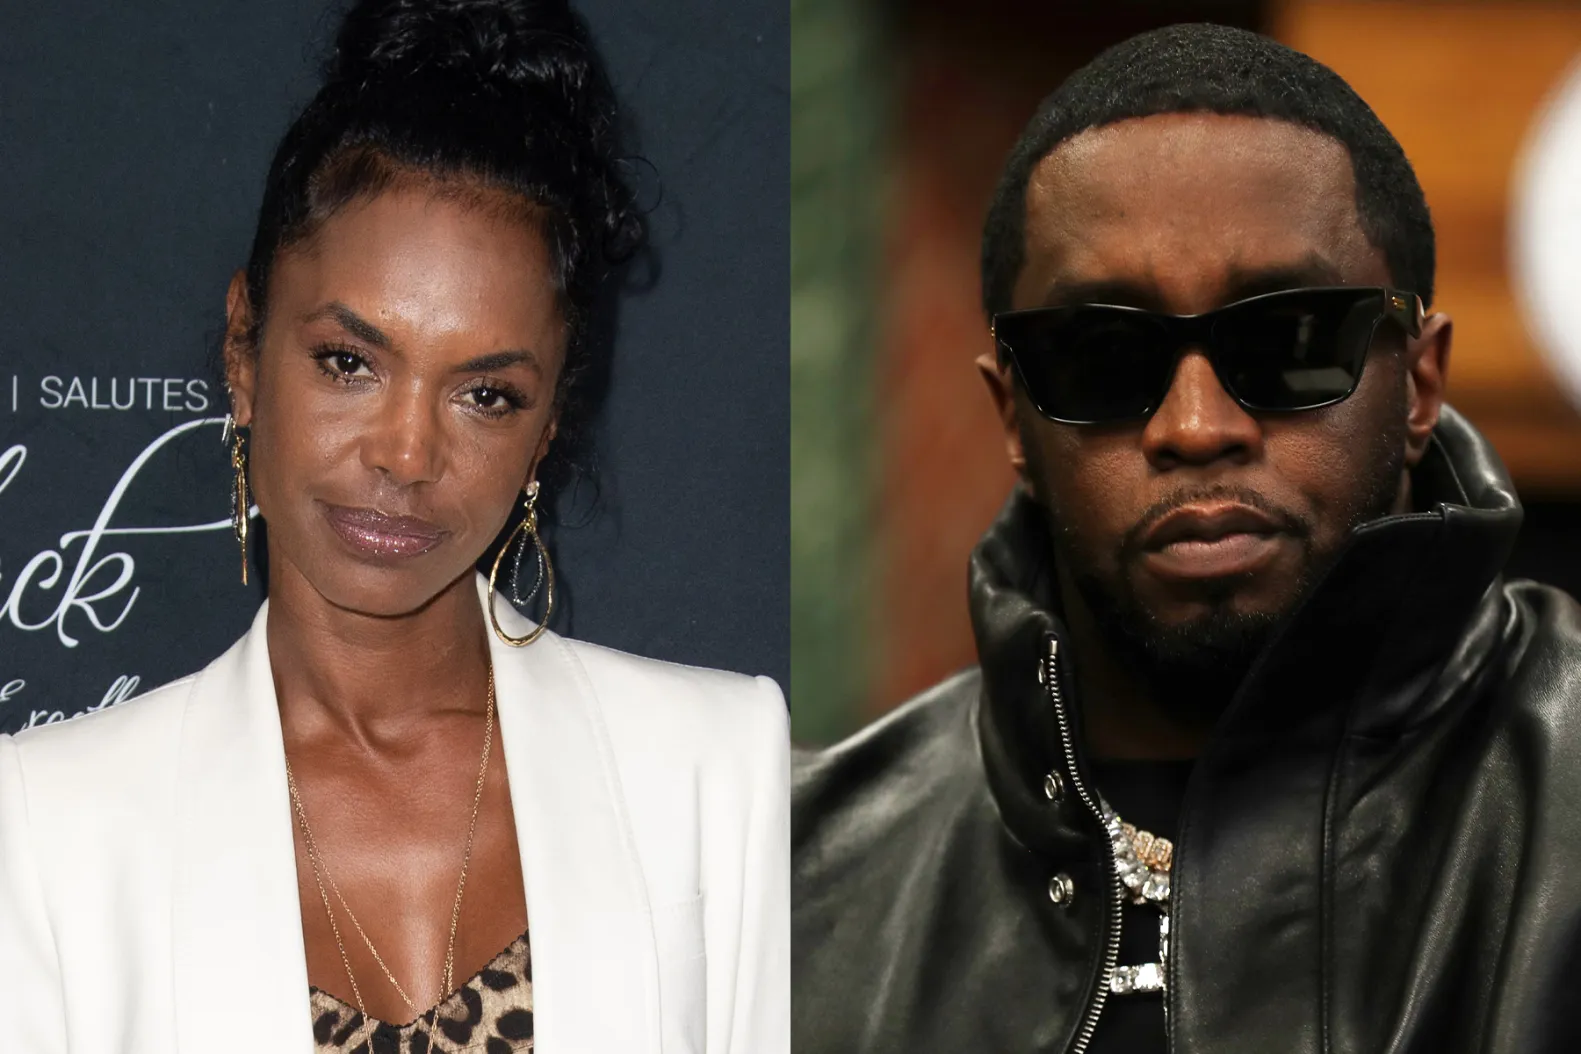 Kim Porter’s Father Rebukes Sean ‘Diddy’ Combs’ Vicious Assault on Cassie: ‘I Didn’t Know He Could Stoop that Low’